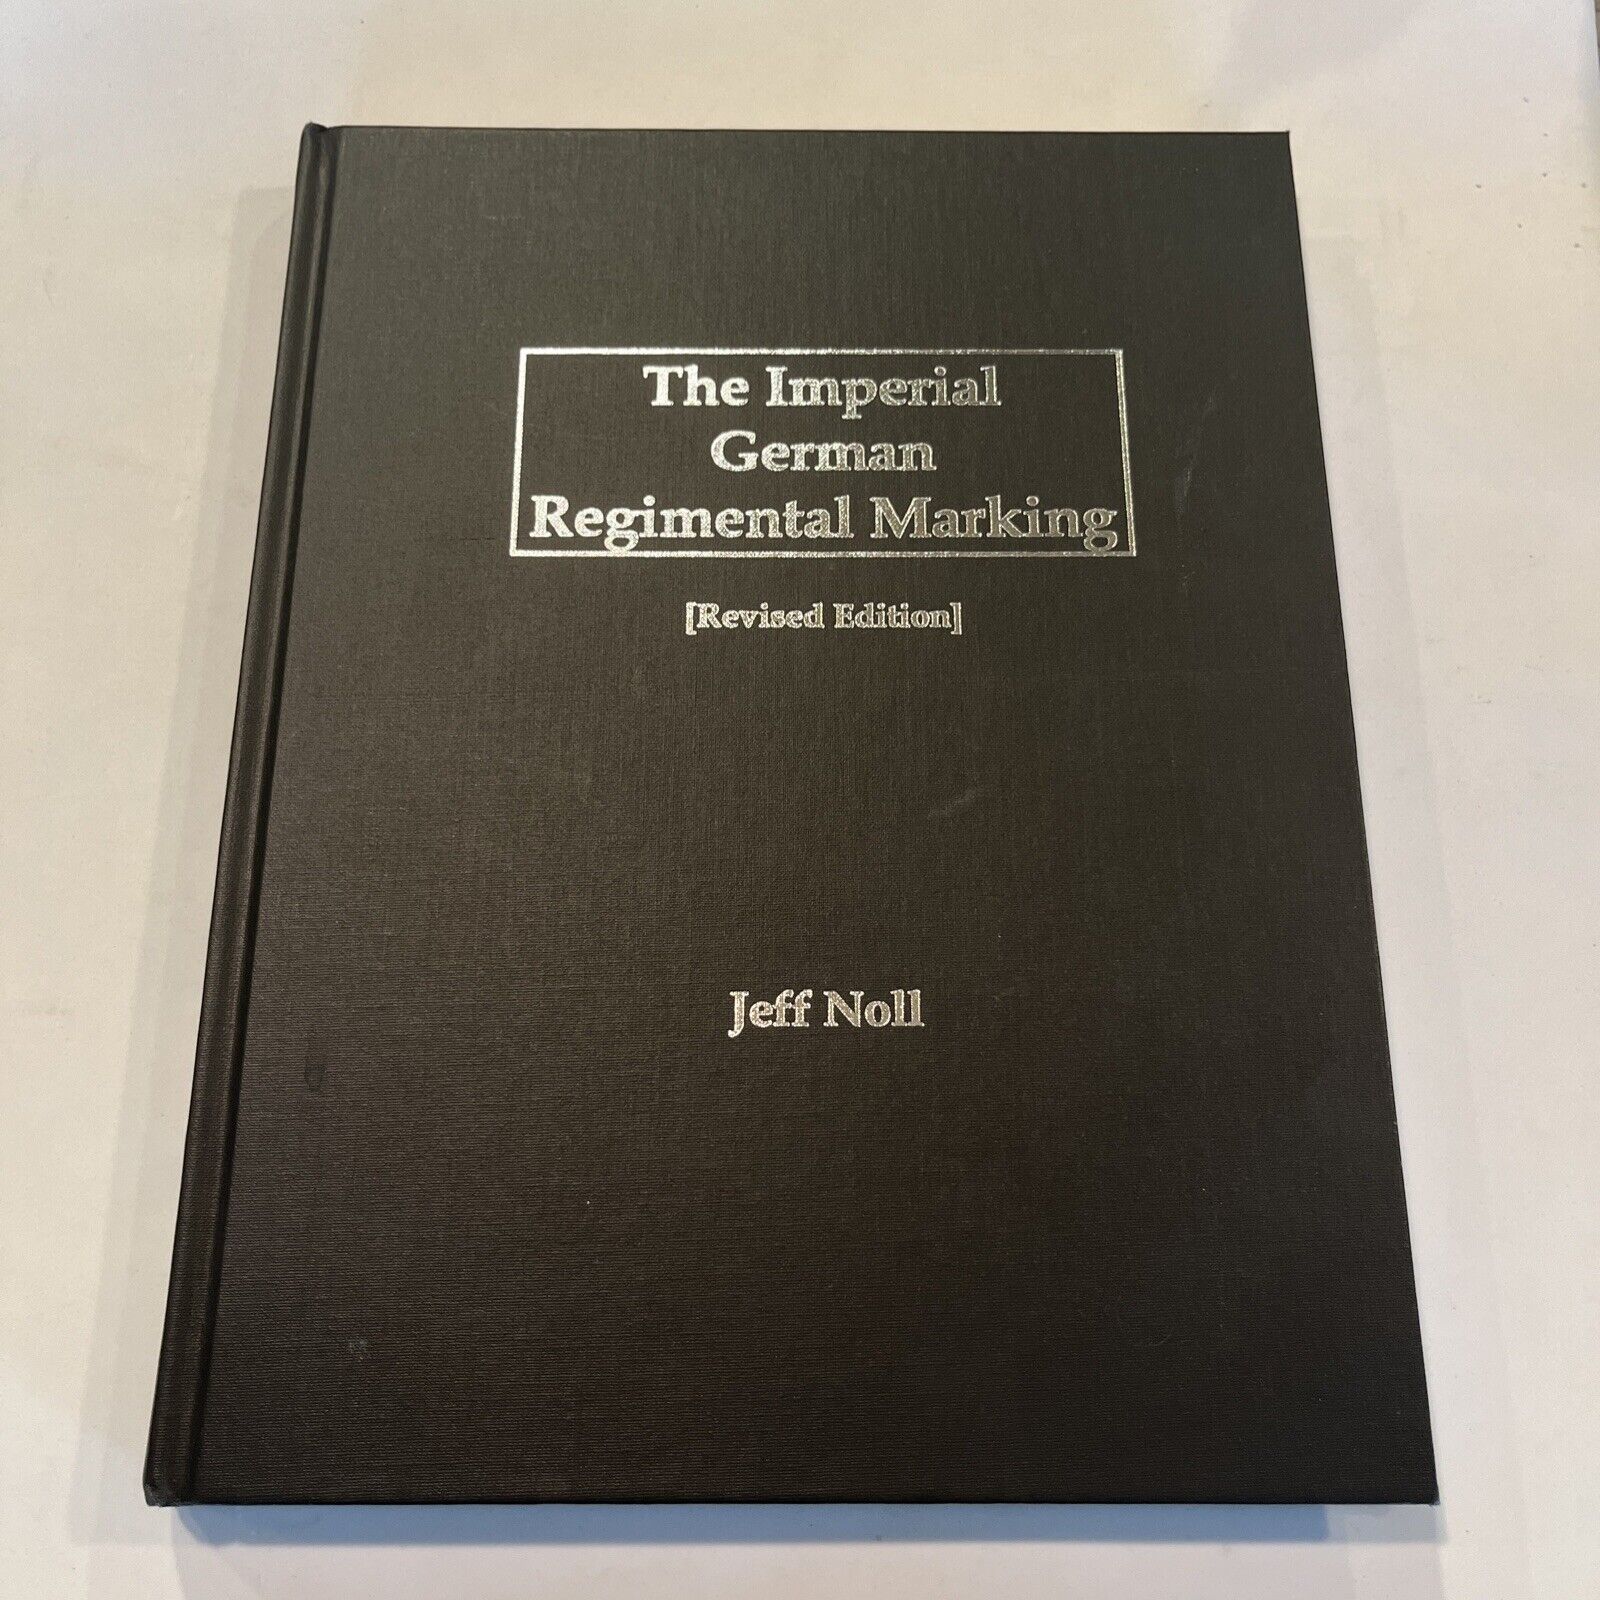 The Imperial German Regimental Marking Hardcover Book Signed And Numbered No. 84